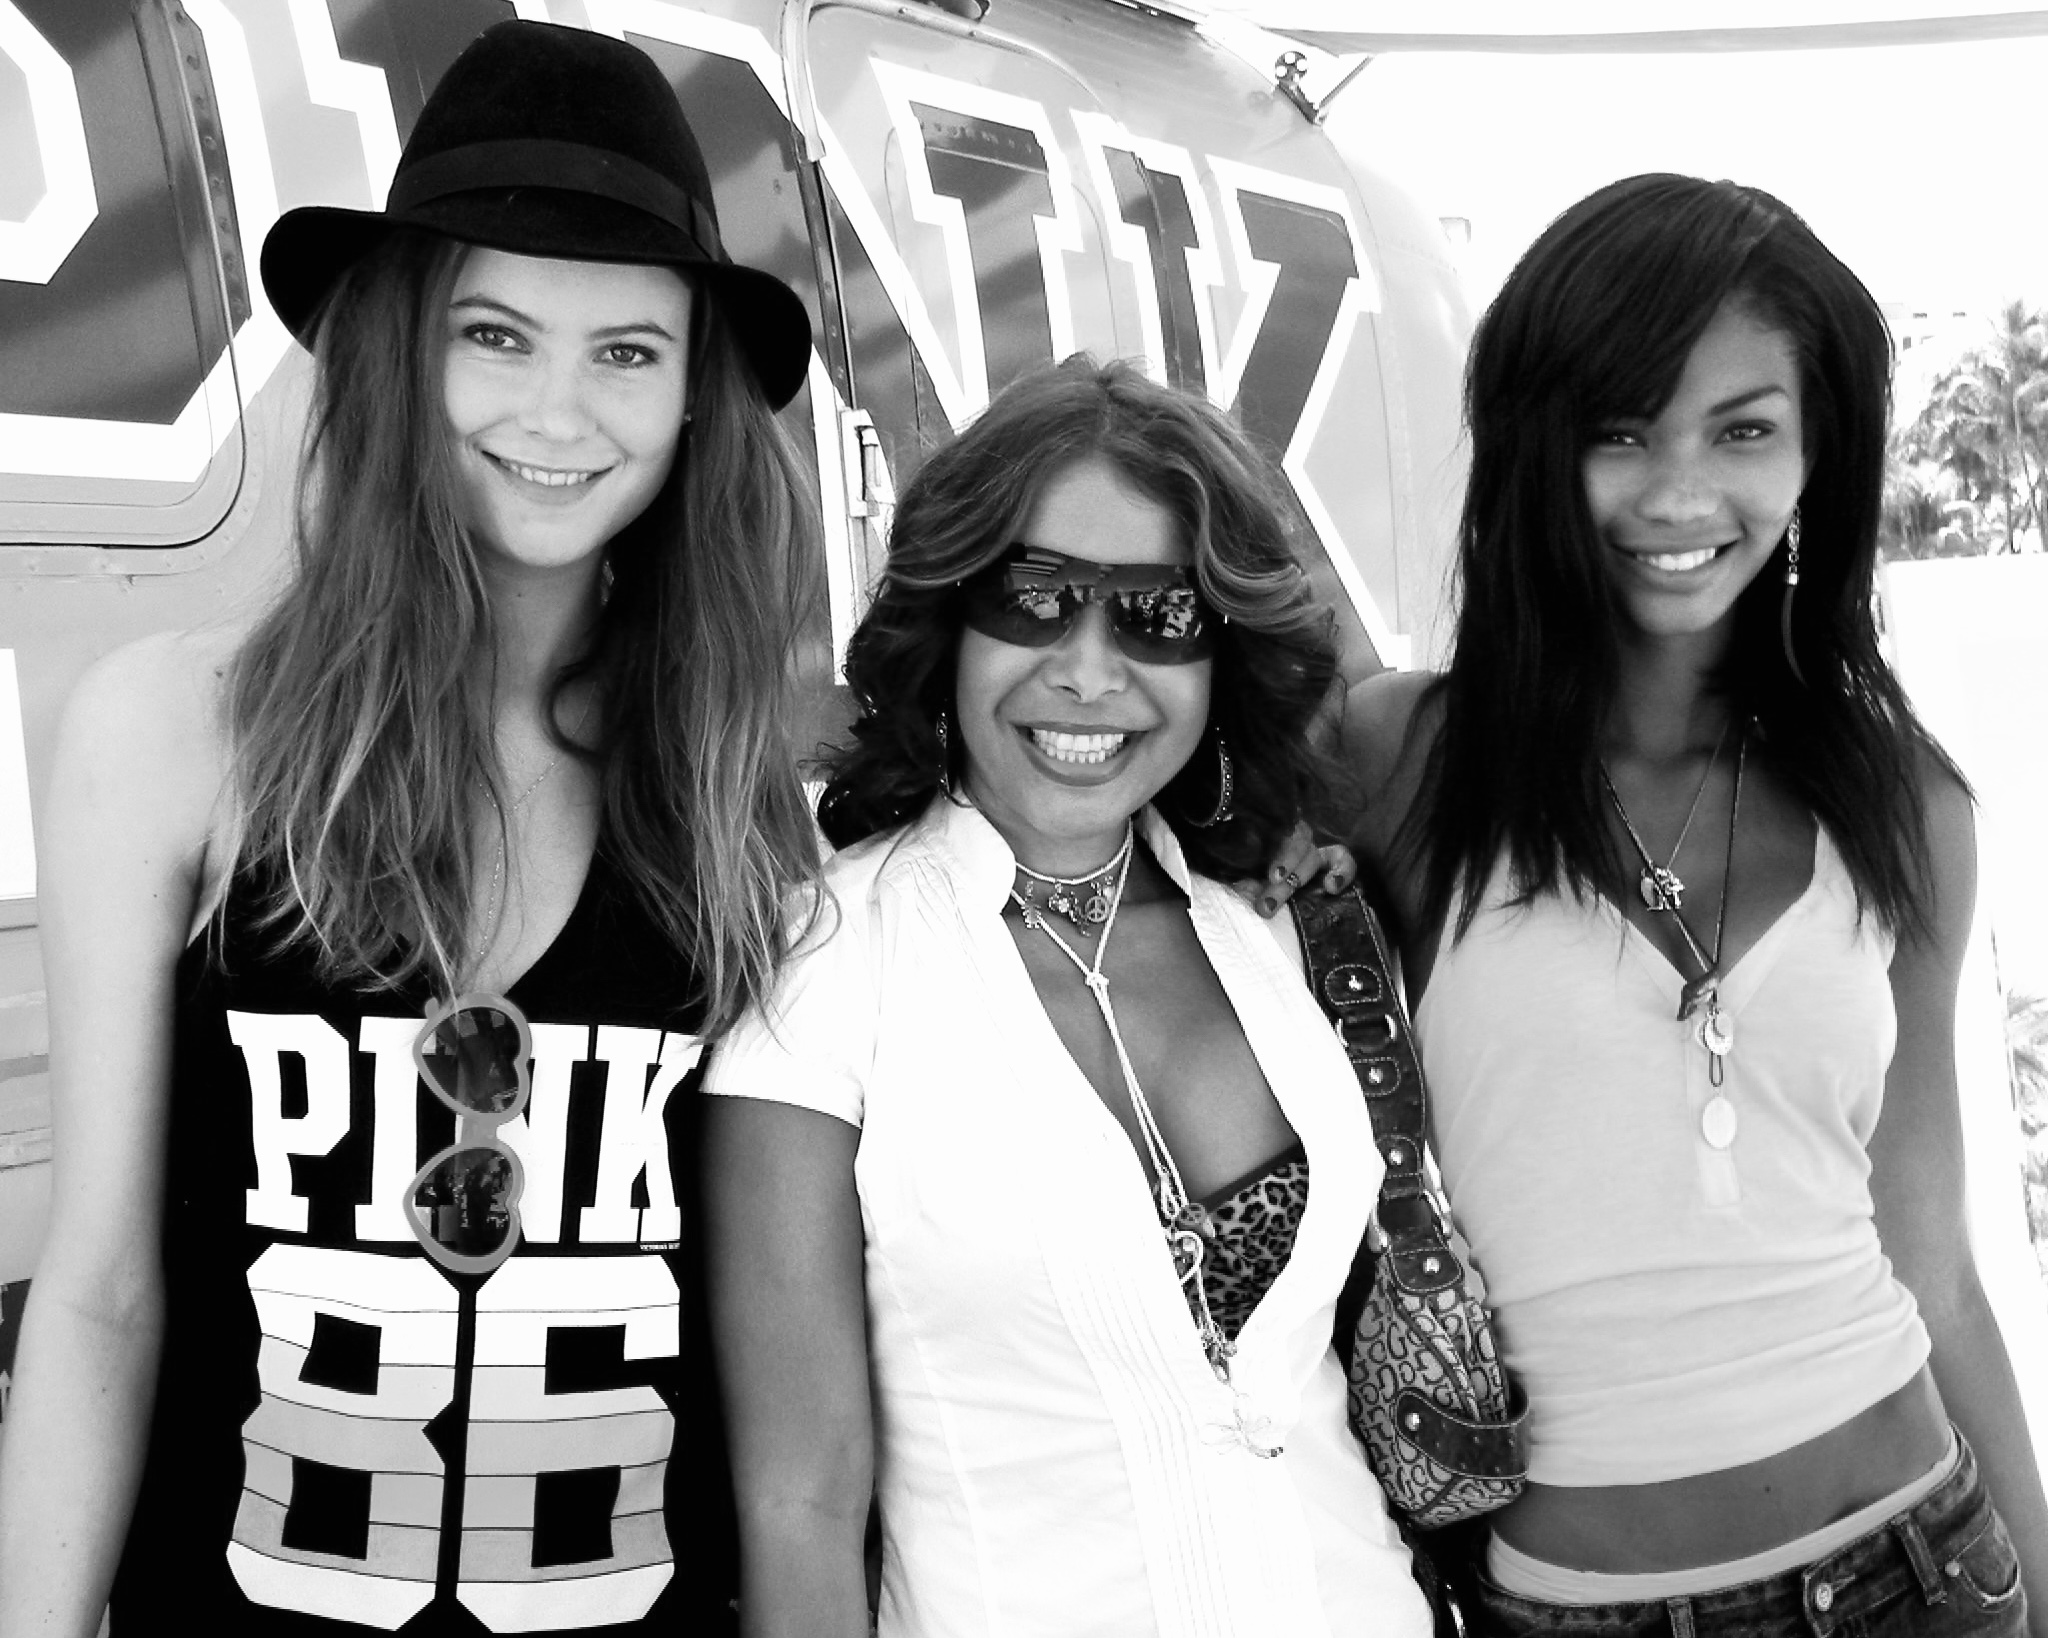 Lissette Rondon (middle) and Victoria's secret Angels, Behati Prinsloo (Left) and Iman (right).